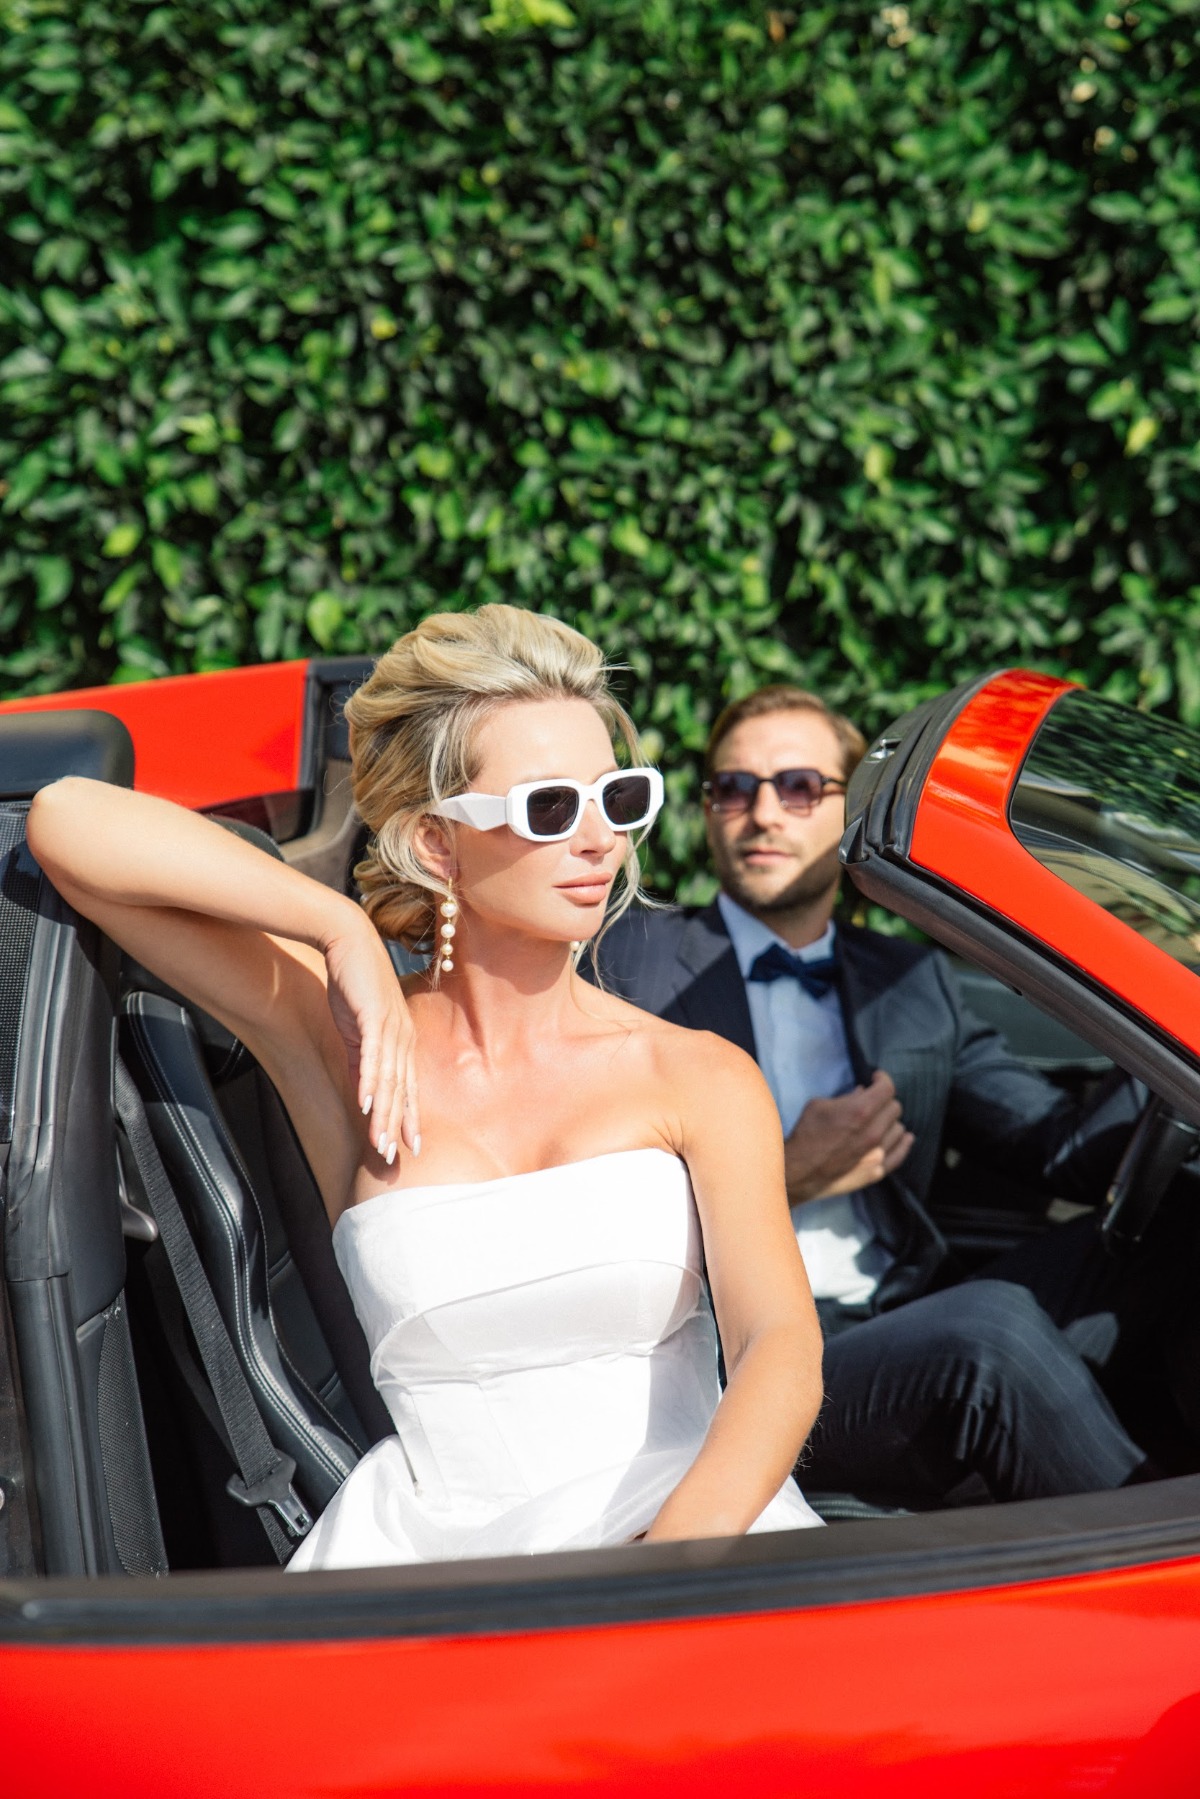 This bride showed up to her Italian ceremony in a classic red Ferrari, Wedding Chicks